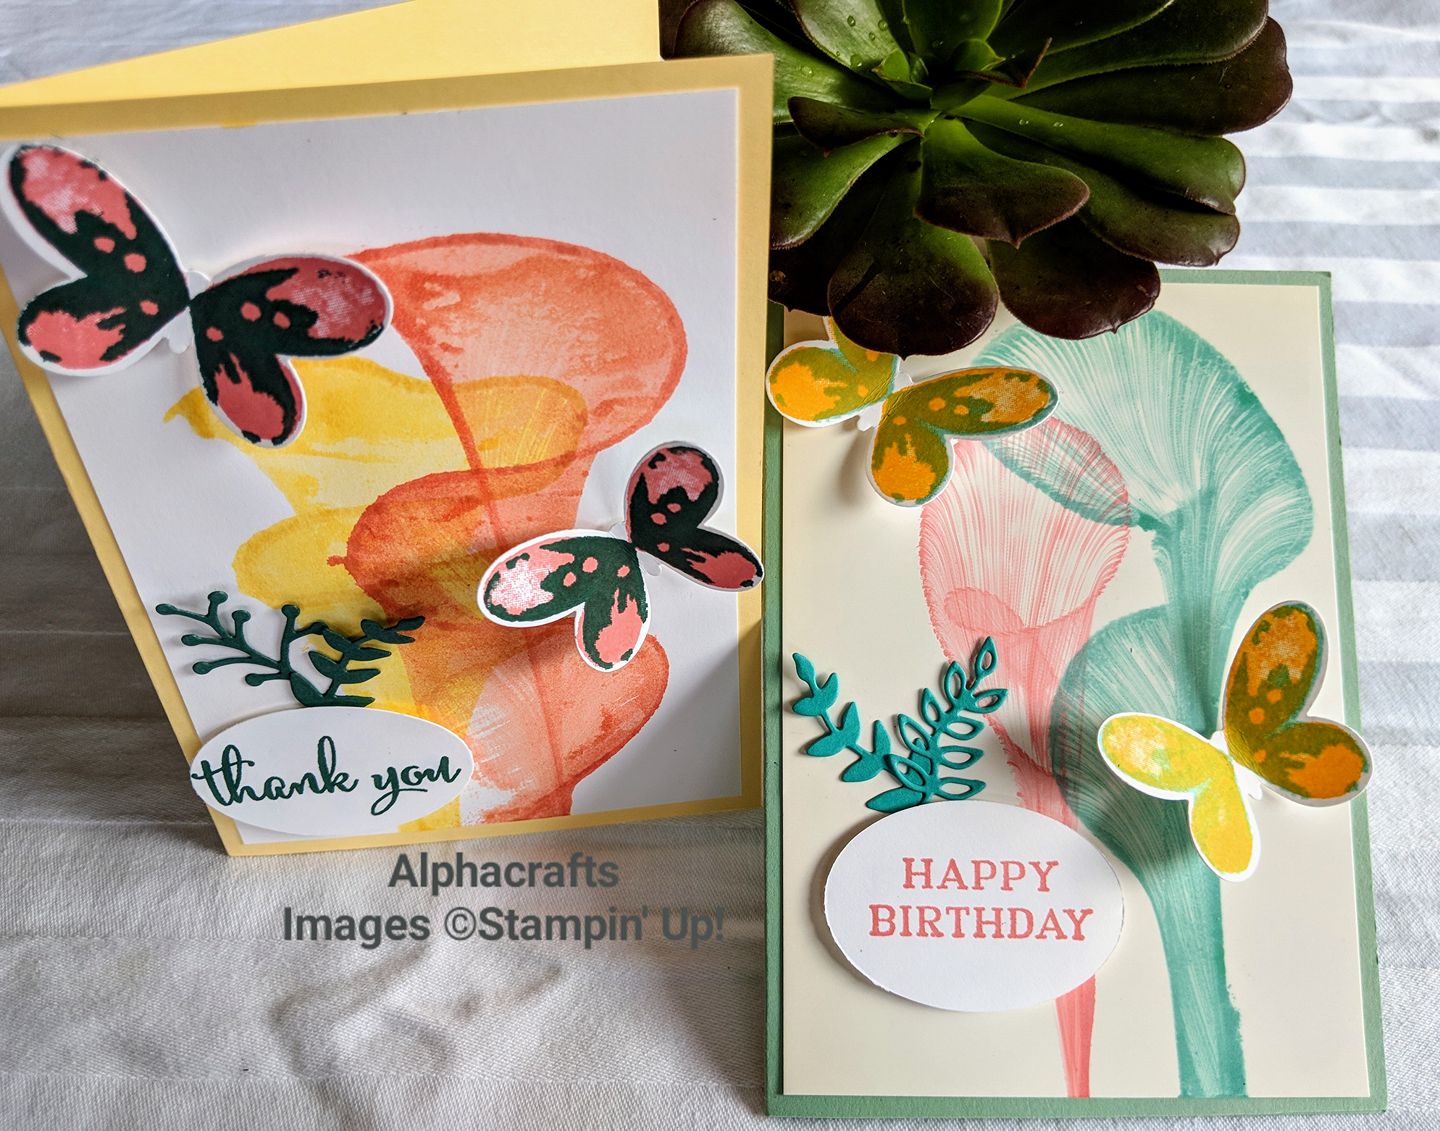 String art cards with butterflies and stamped with happy birthday and thank you.